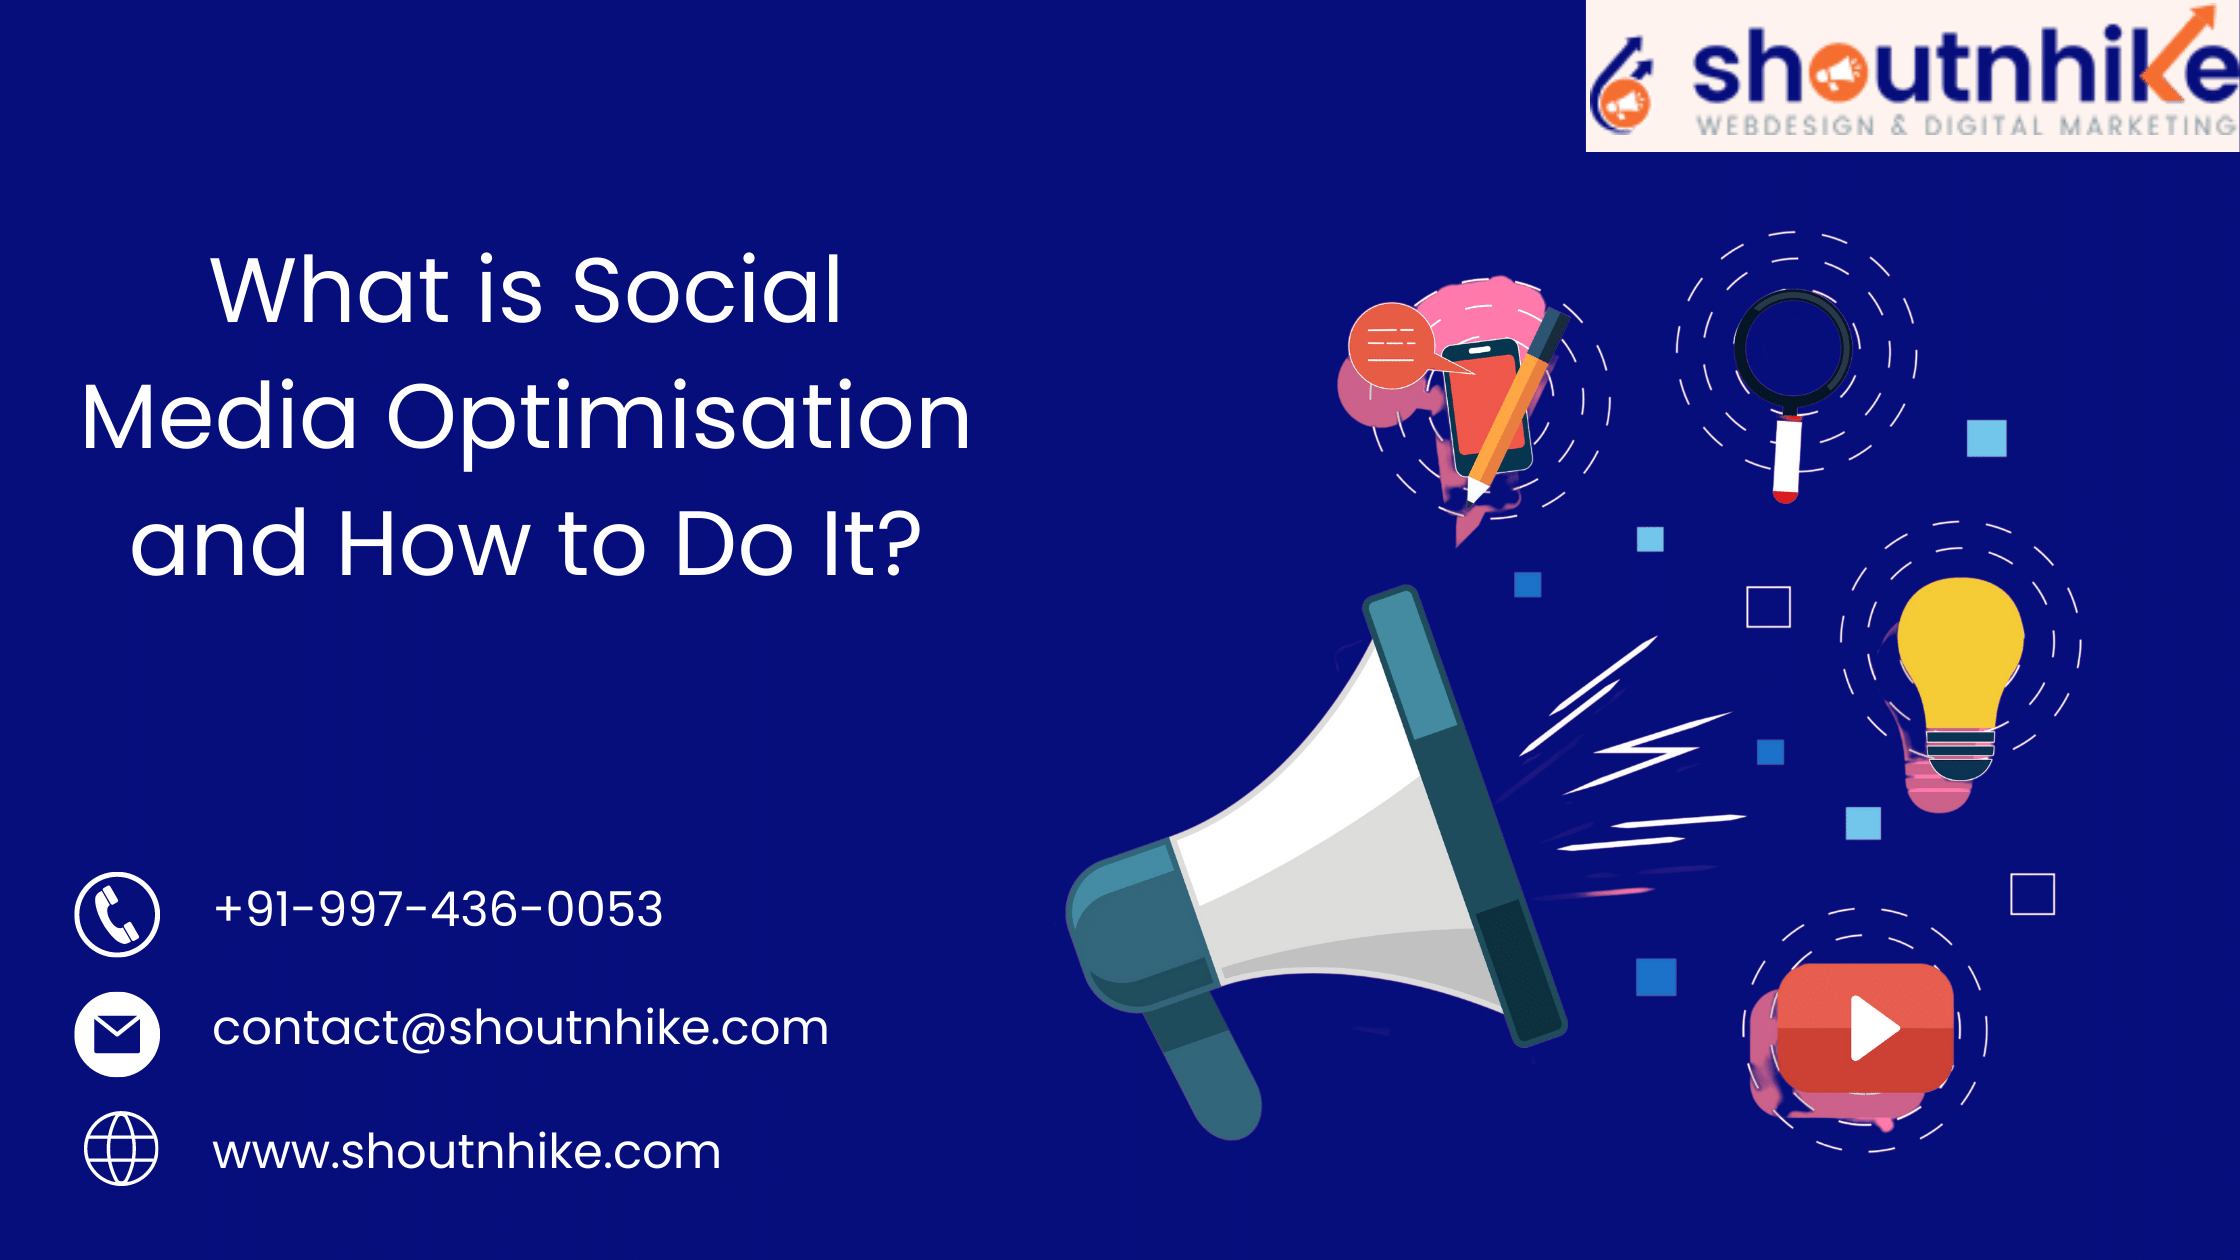 What is Social Media Optimisation and How to Do It?